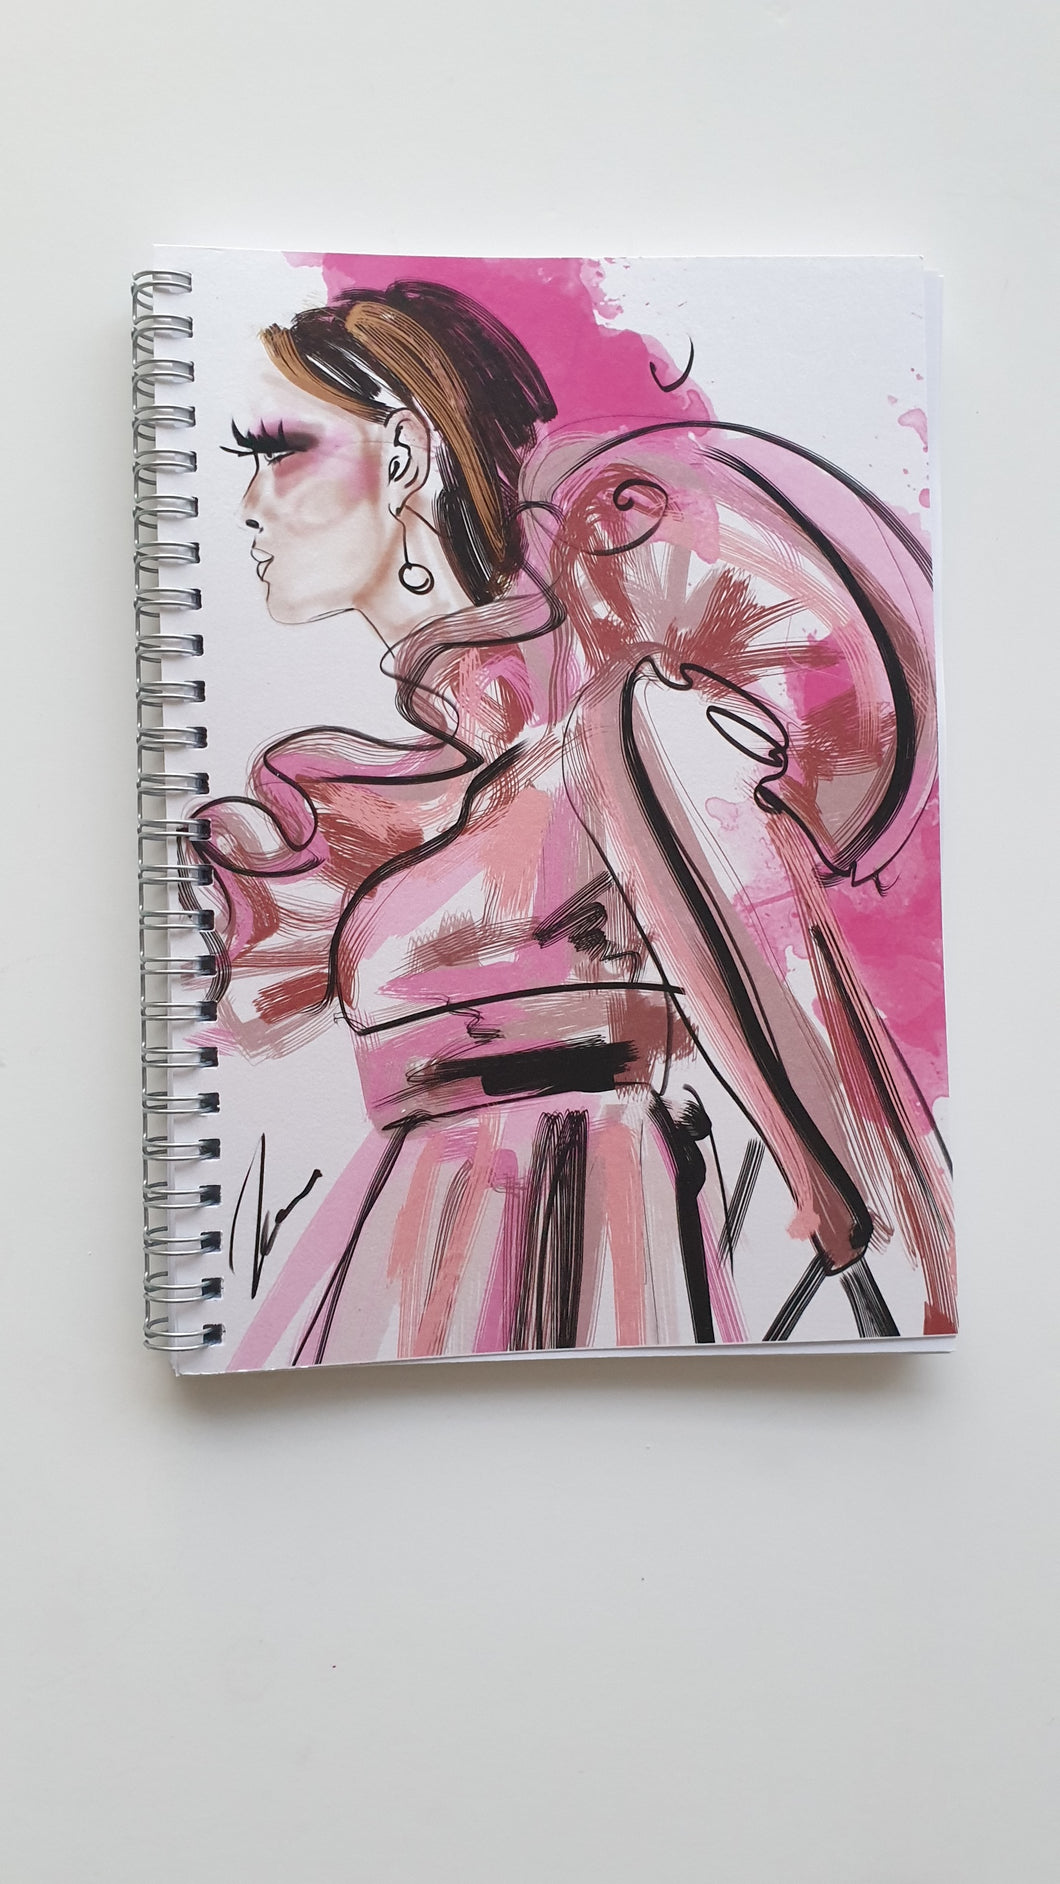 Ruled Notebook Journal with art cover of Lady in Valentino by Talia Zoref